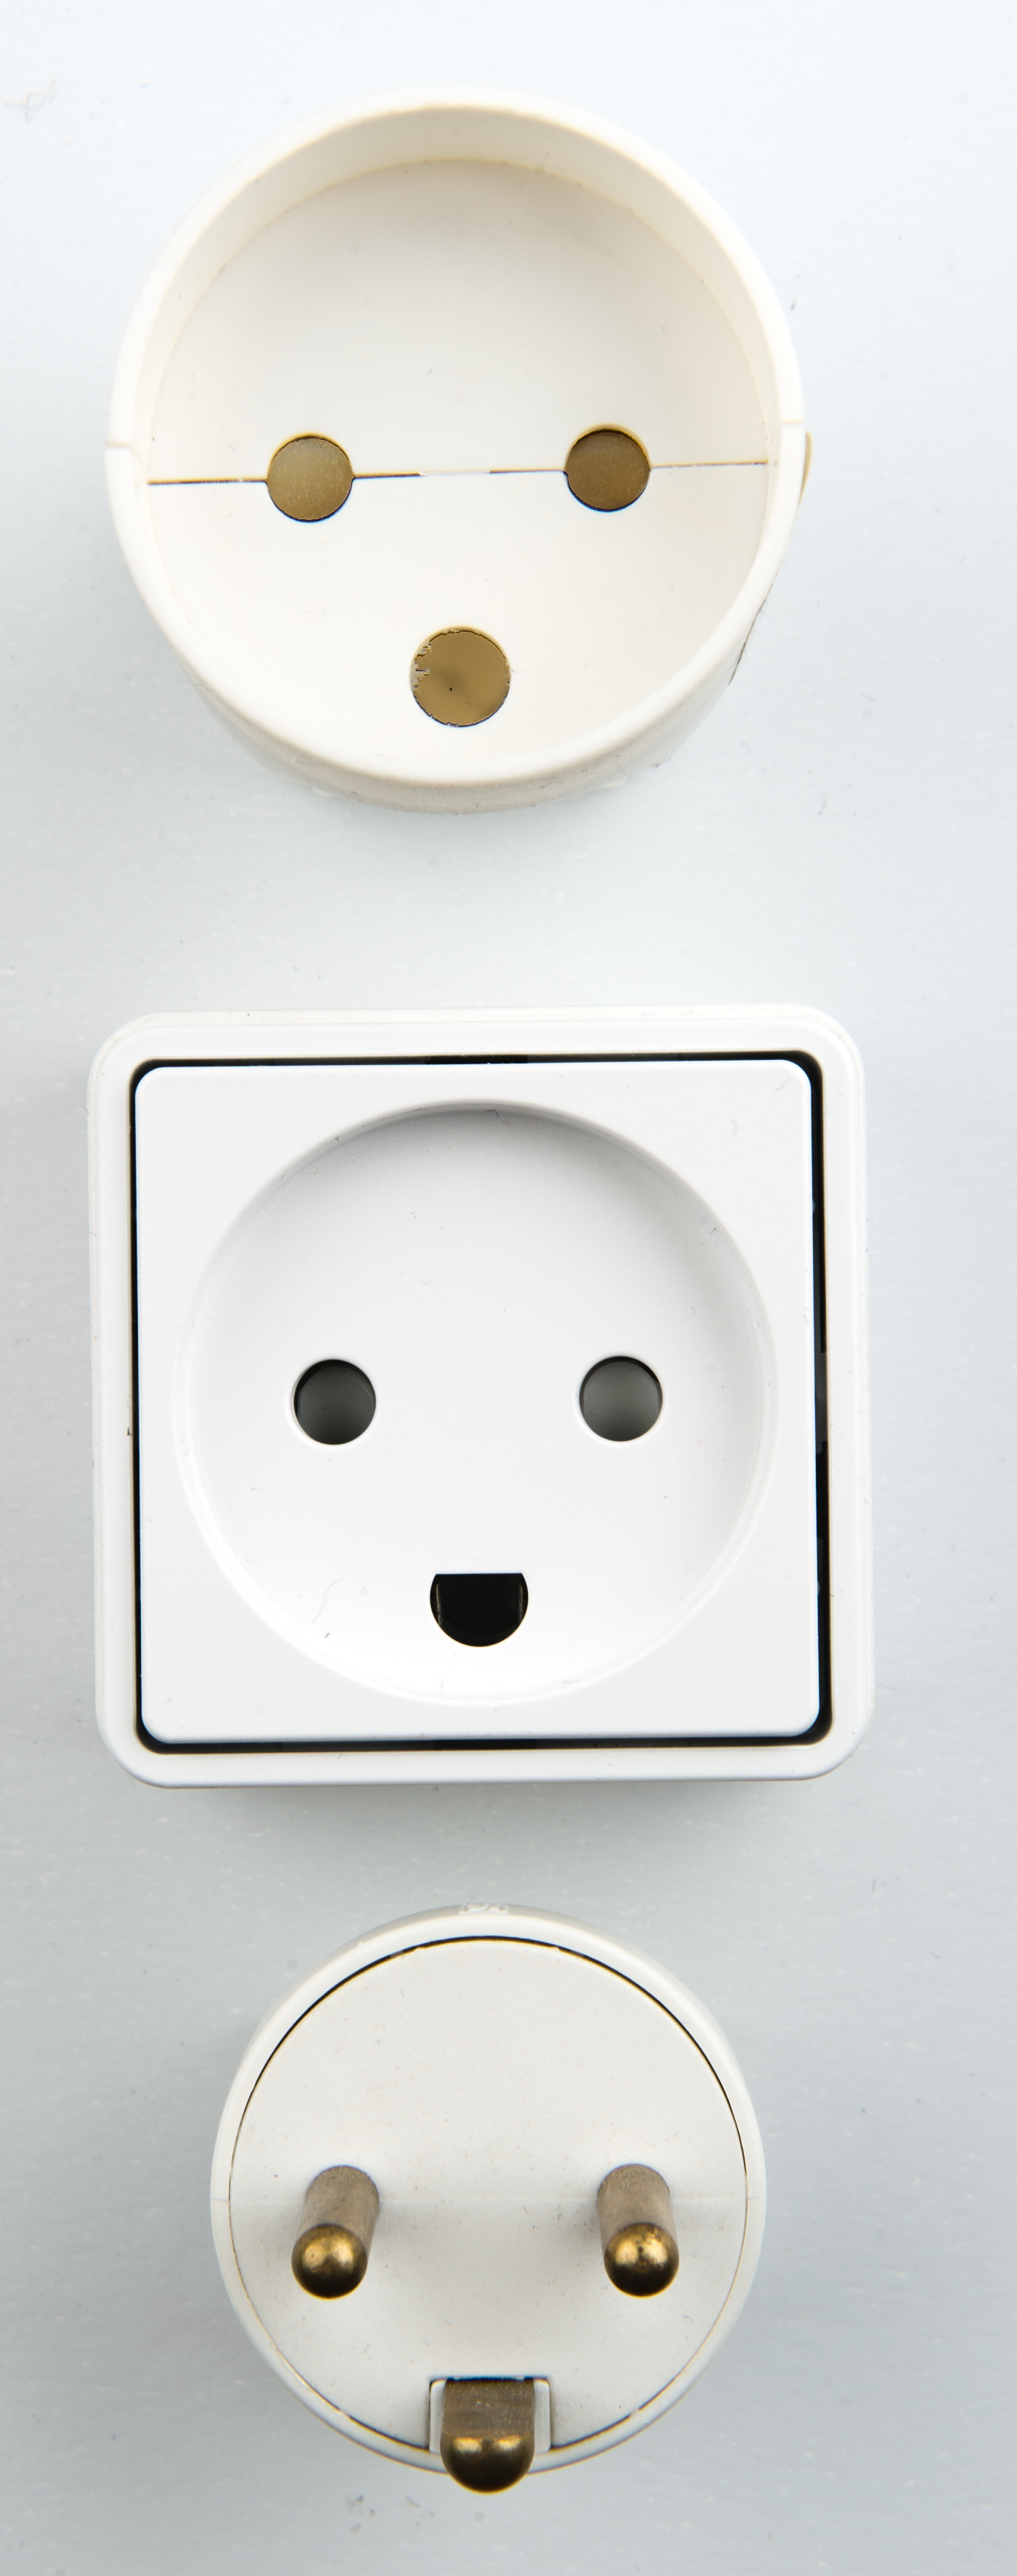 electrical outlets | Welcome to the party, have a biscuit.